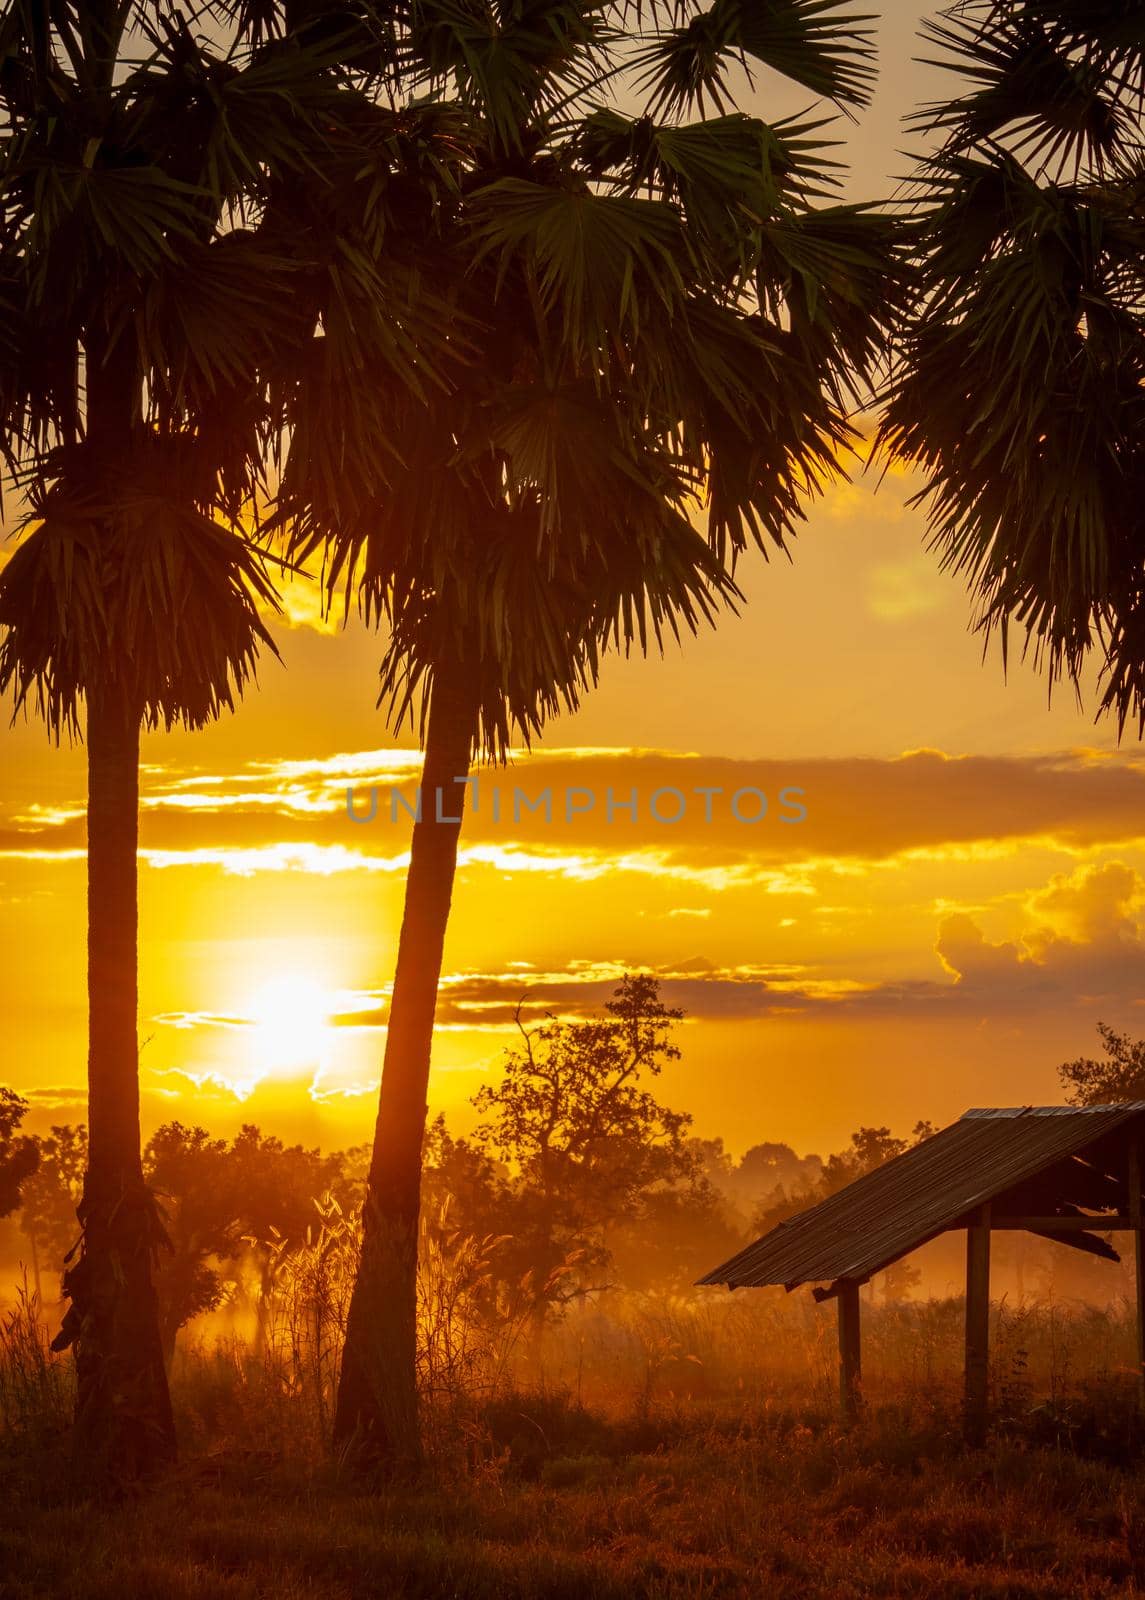 Sugar palm tree and old hut in the morning with the beautiful sunrise sky. Golden sunrise sky in rural with grass field and mist above the grass. Country view. Sunrise shine behind palm tree and hut. by Fahroni